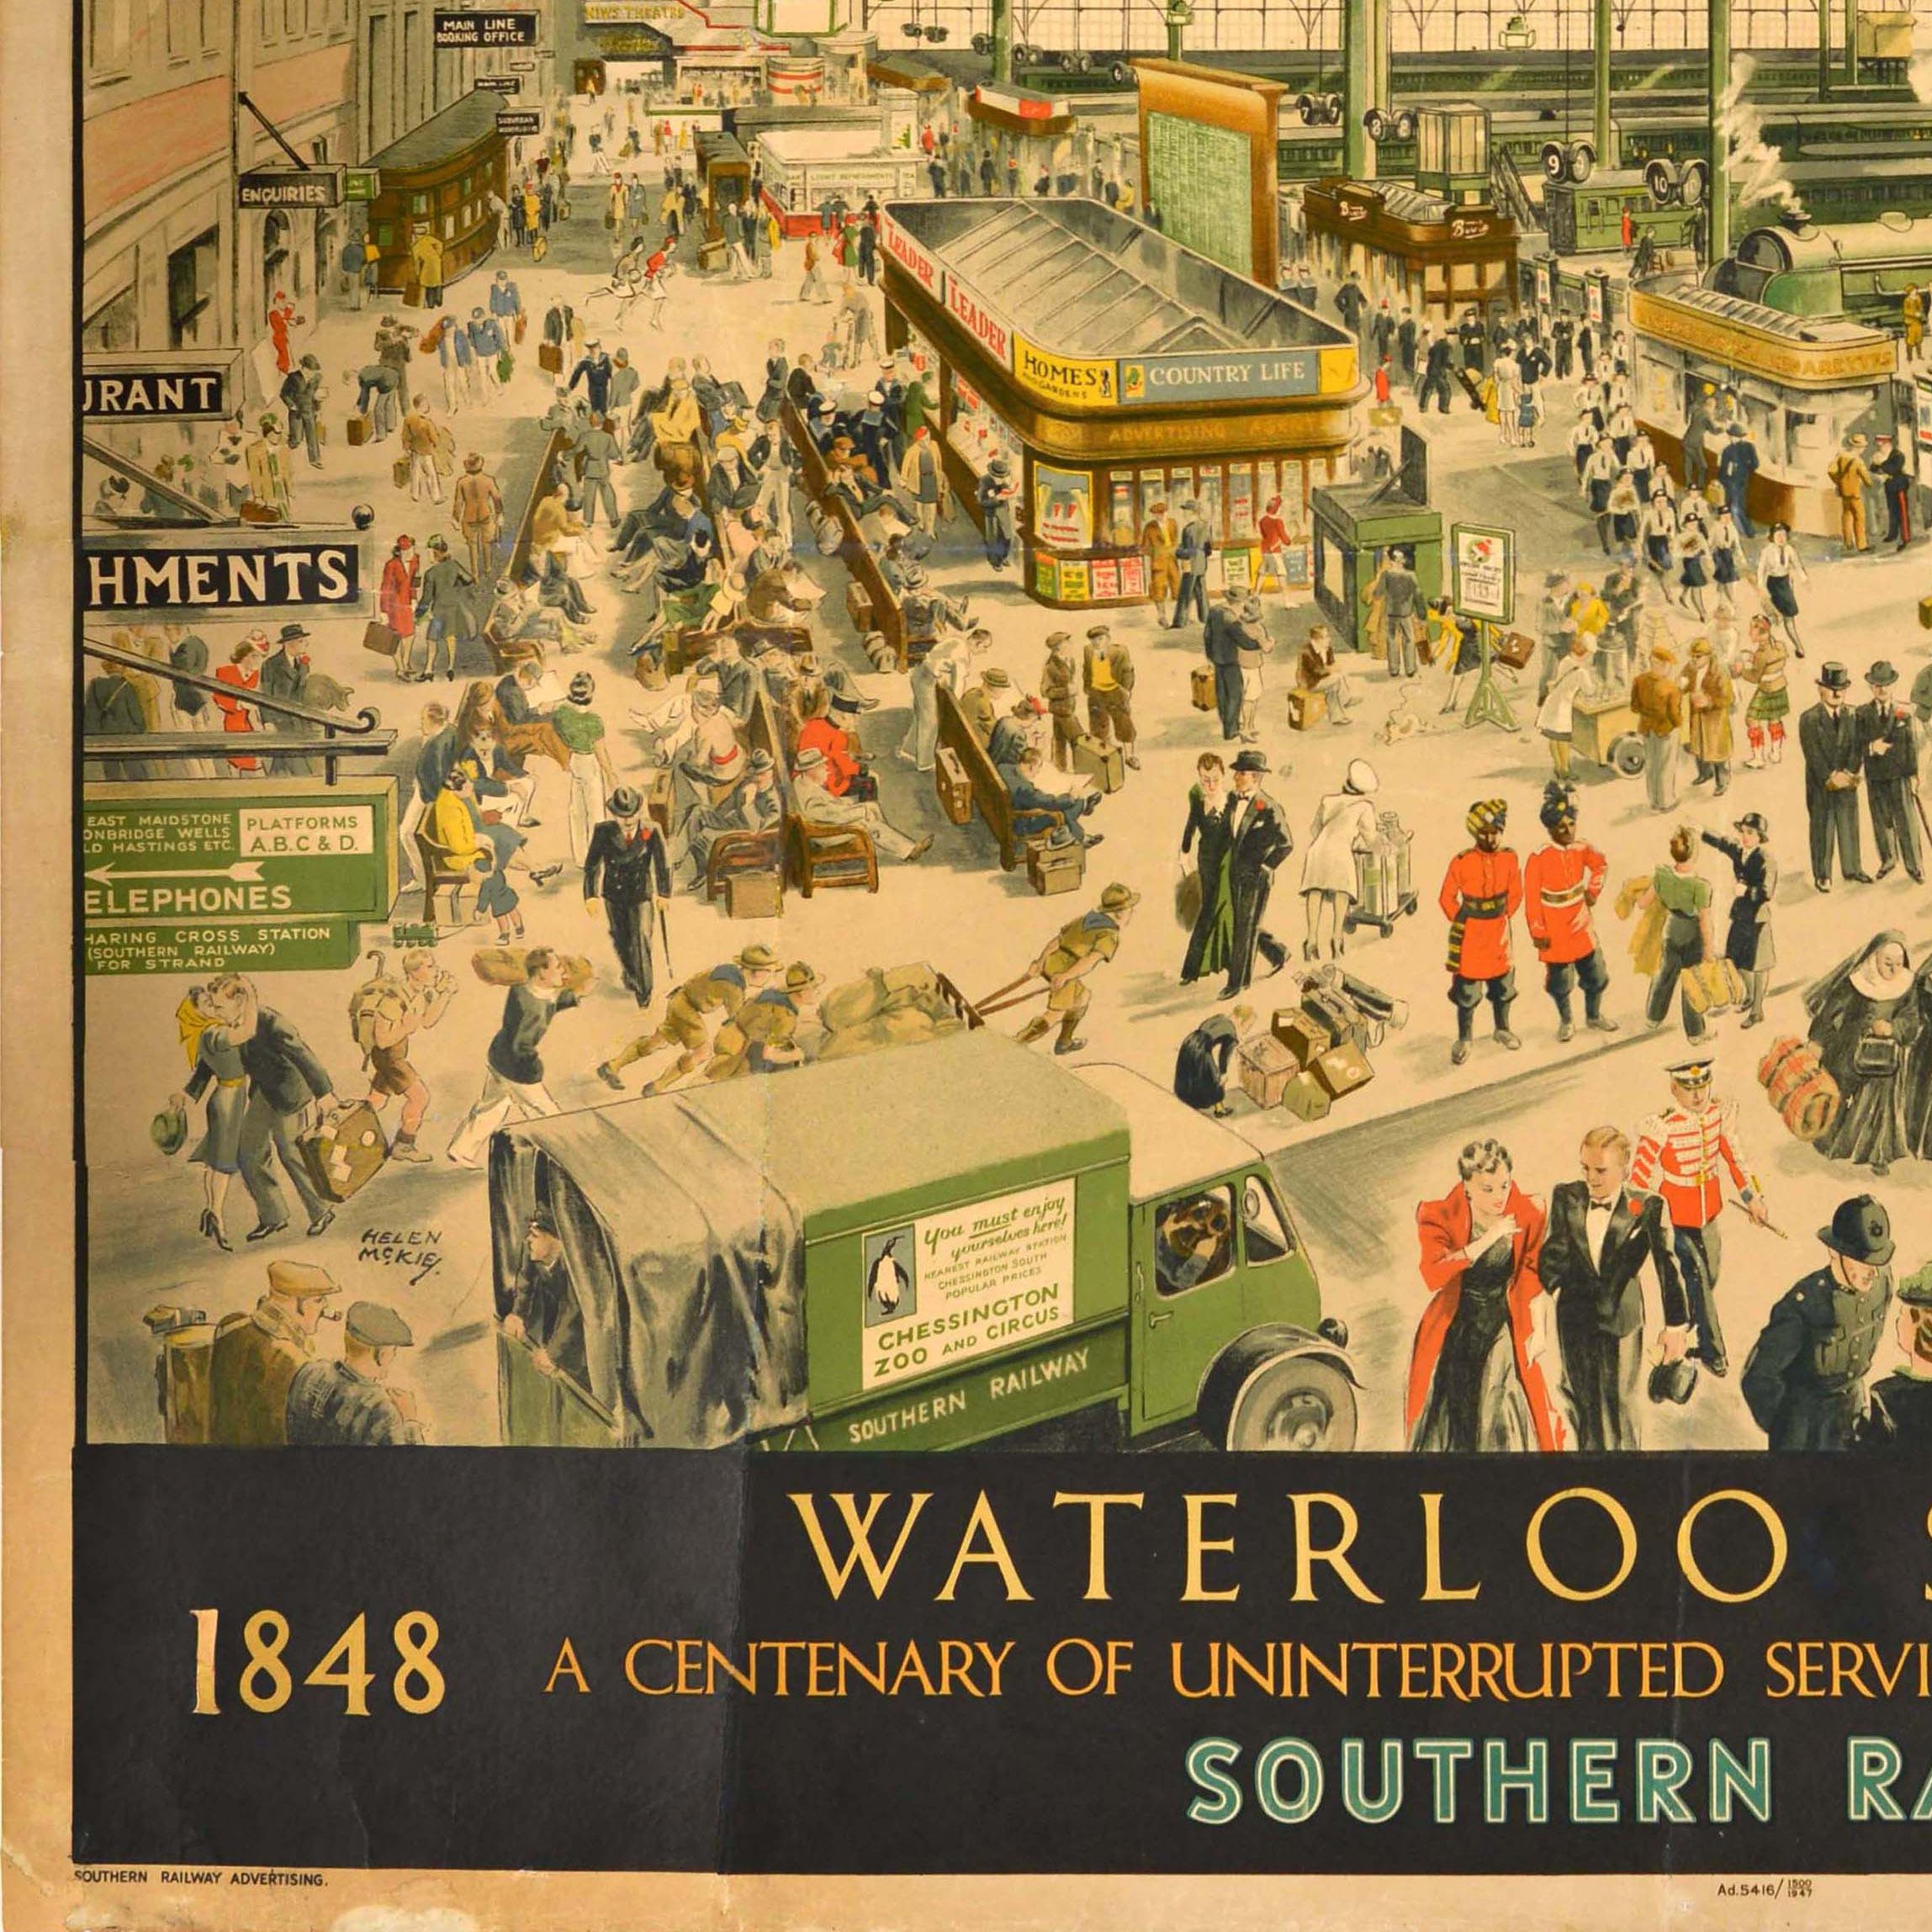 Original Vintage Travel Advertising Poster Waterloo Station Southern Railway  For Sale 1